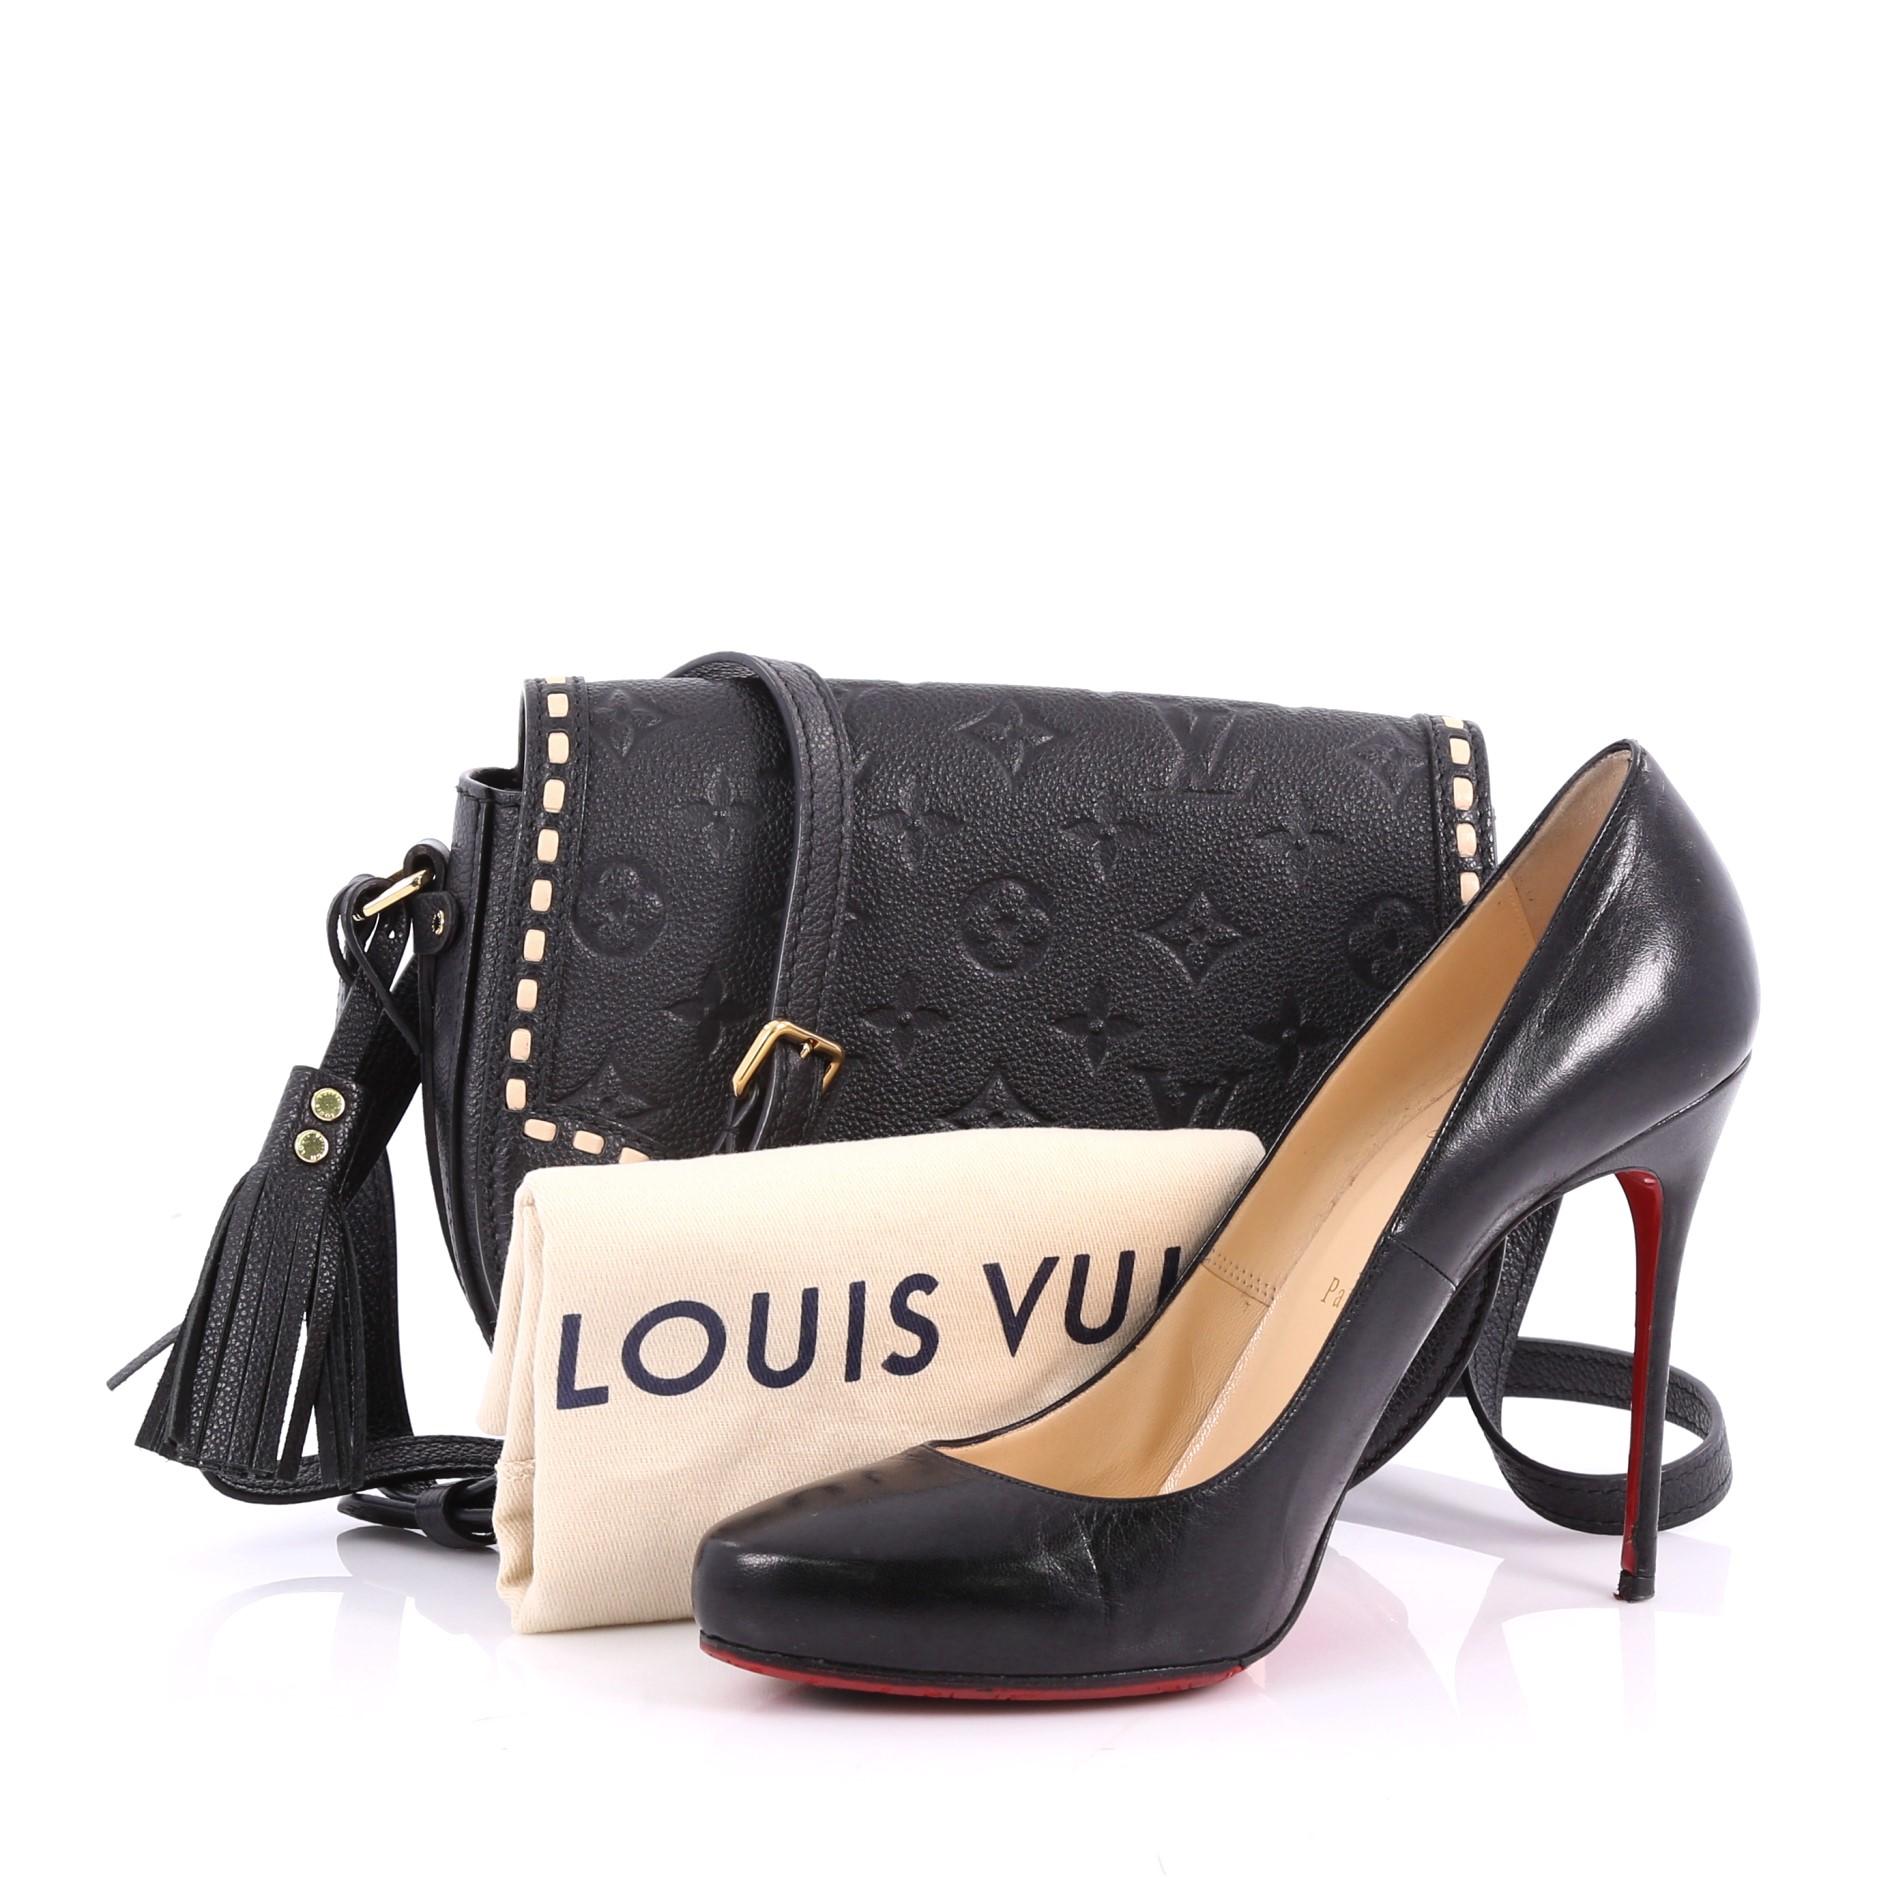 This authentic Louis Vuitton Junot Handbag Monogram Empreinte Leather is a stylish crossbody bag. Crafted in black monogram empreinte leather, this bag features adjustable shoulder strap, leather stitched detailing, front flap with push-lock closure